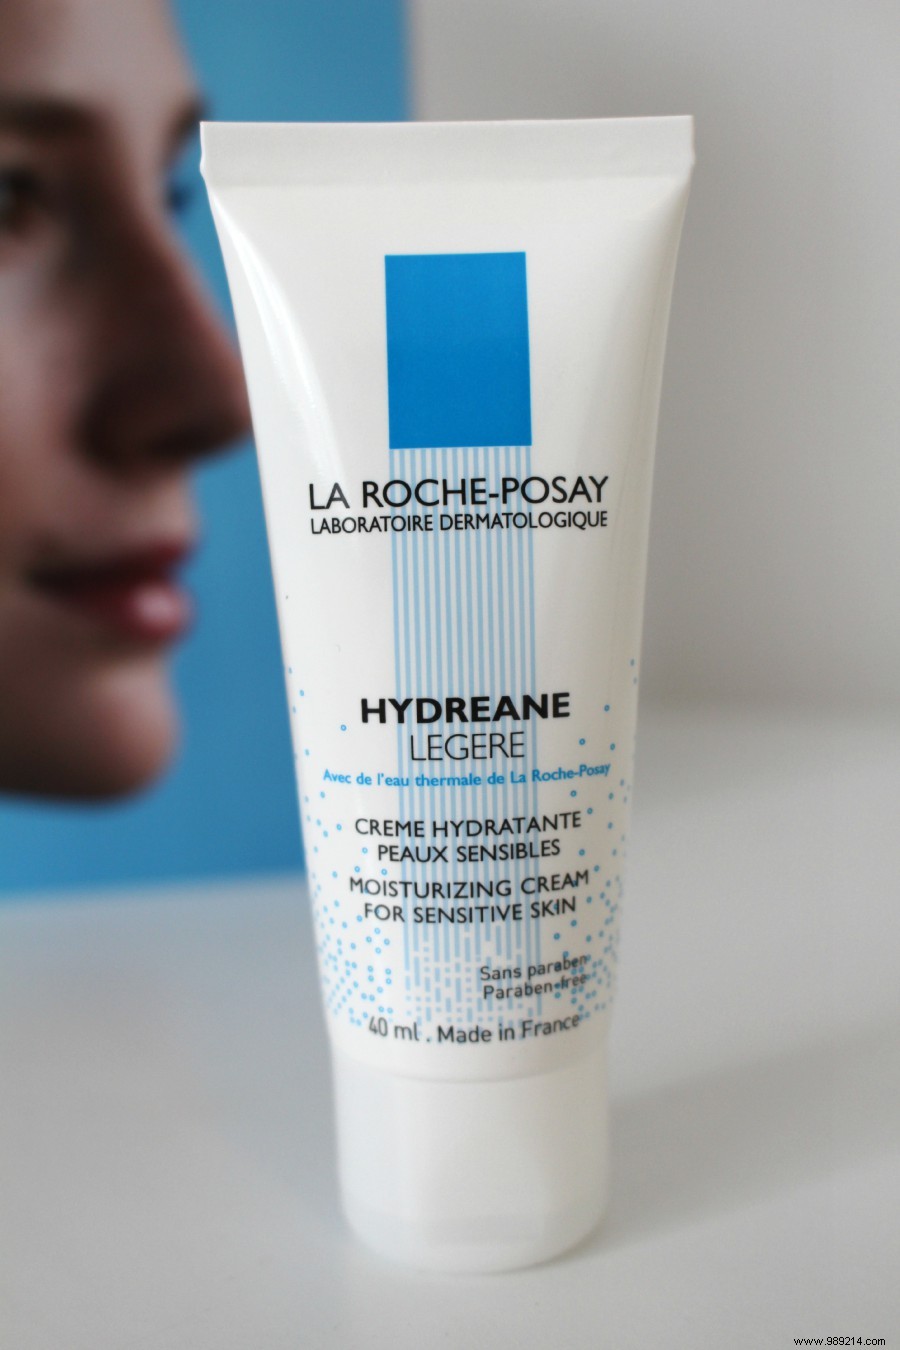 S.O.S beauty:tips for well-hydrated skin with “Hydreane”, La Roche Posay 